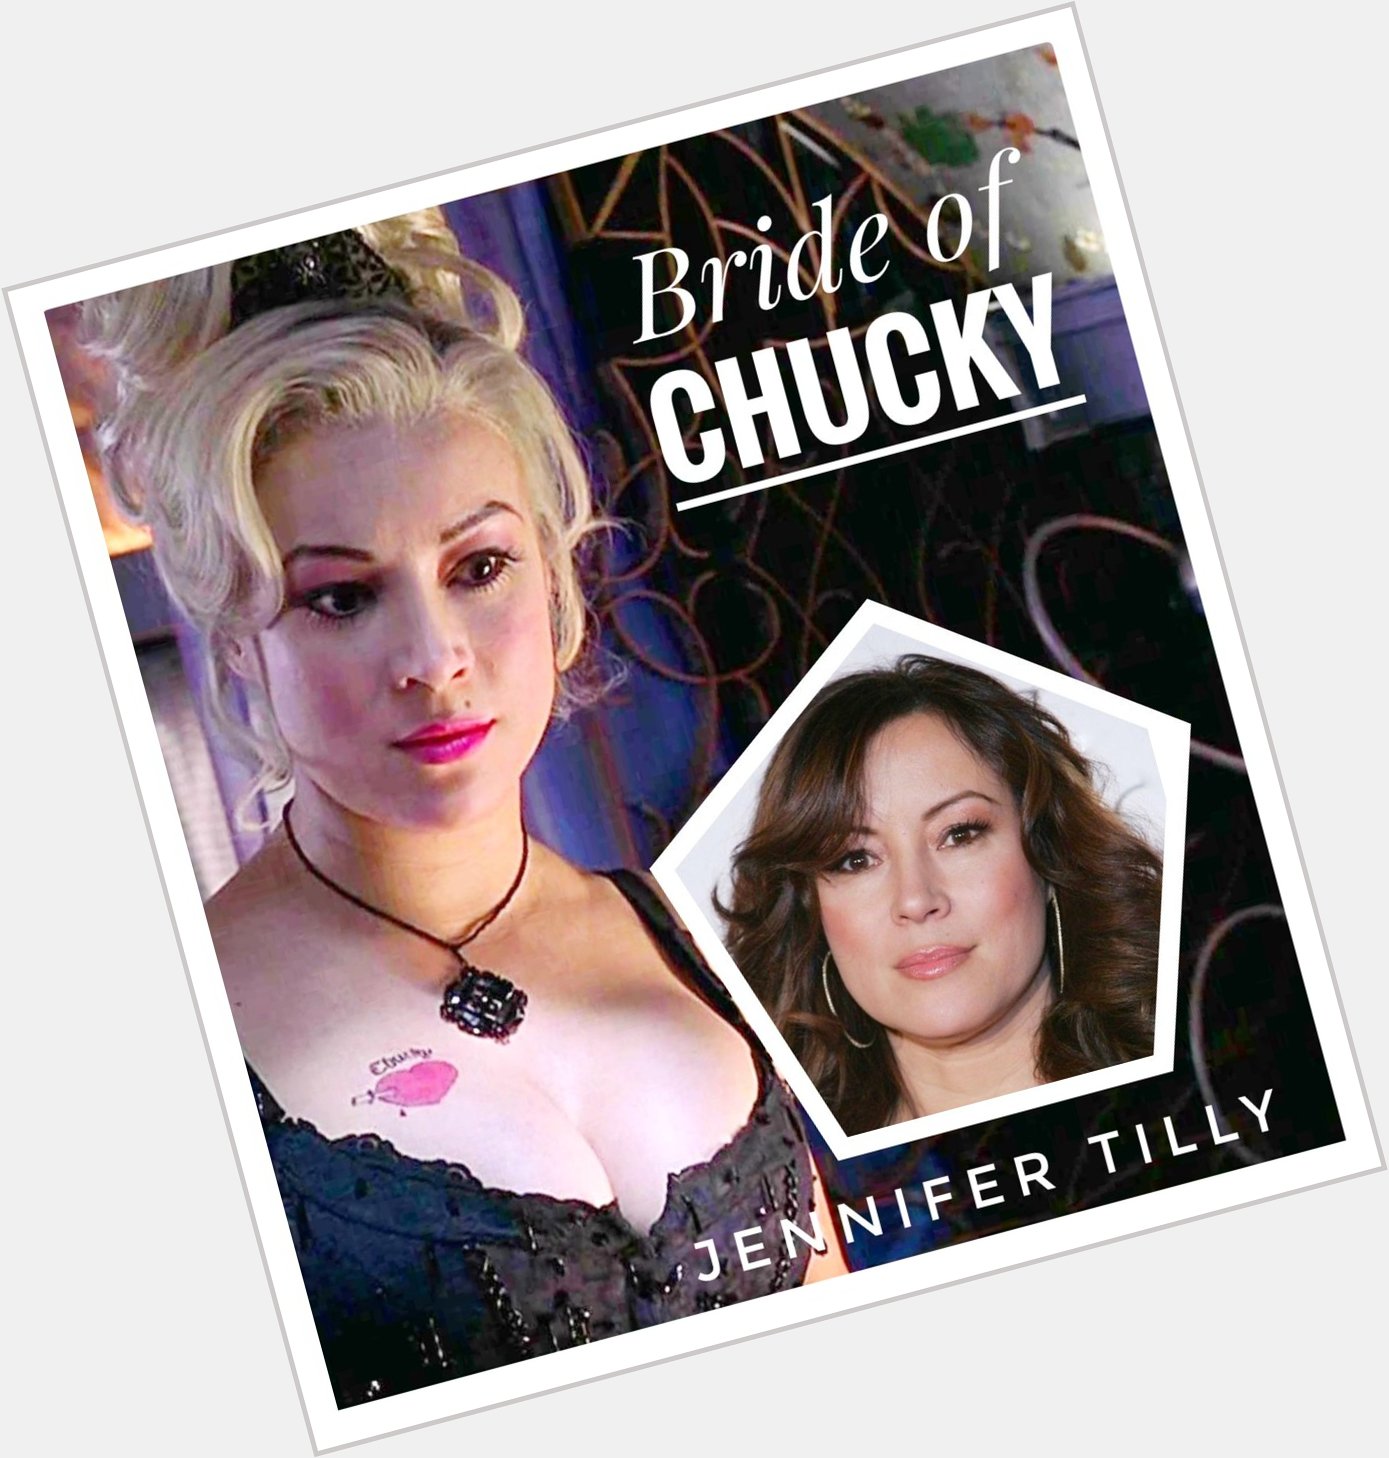 Jennifer Tilly was born on this day happy birthday. 